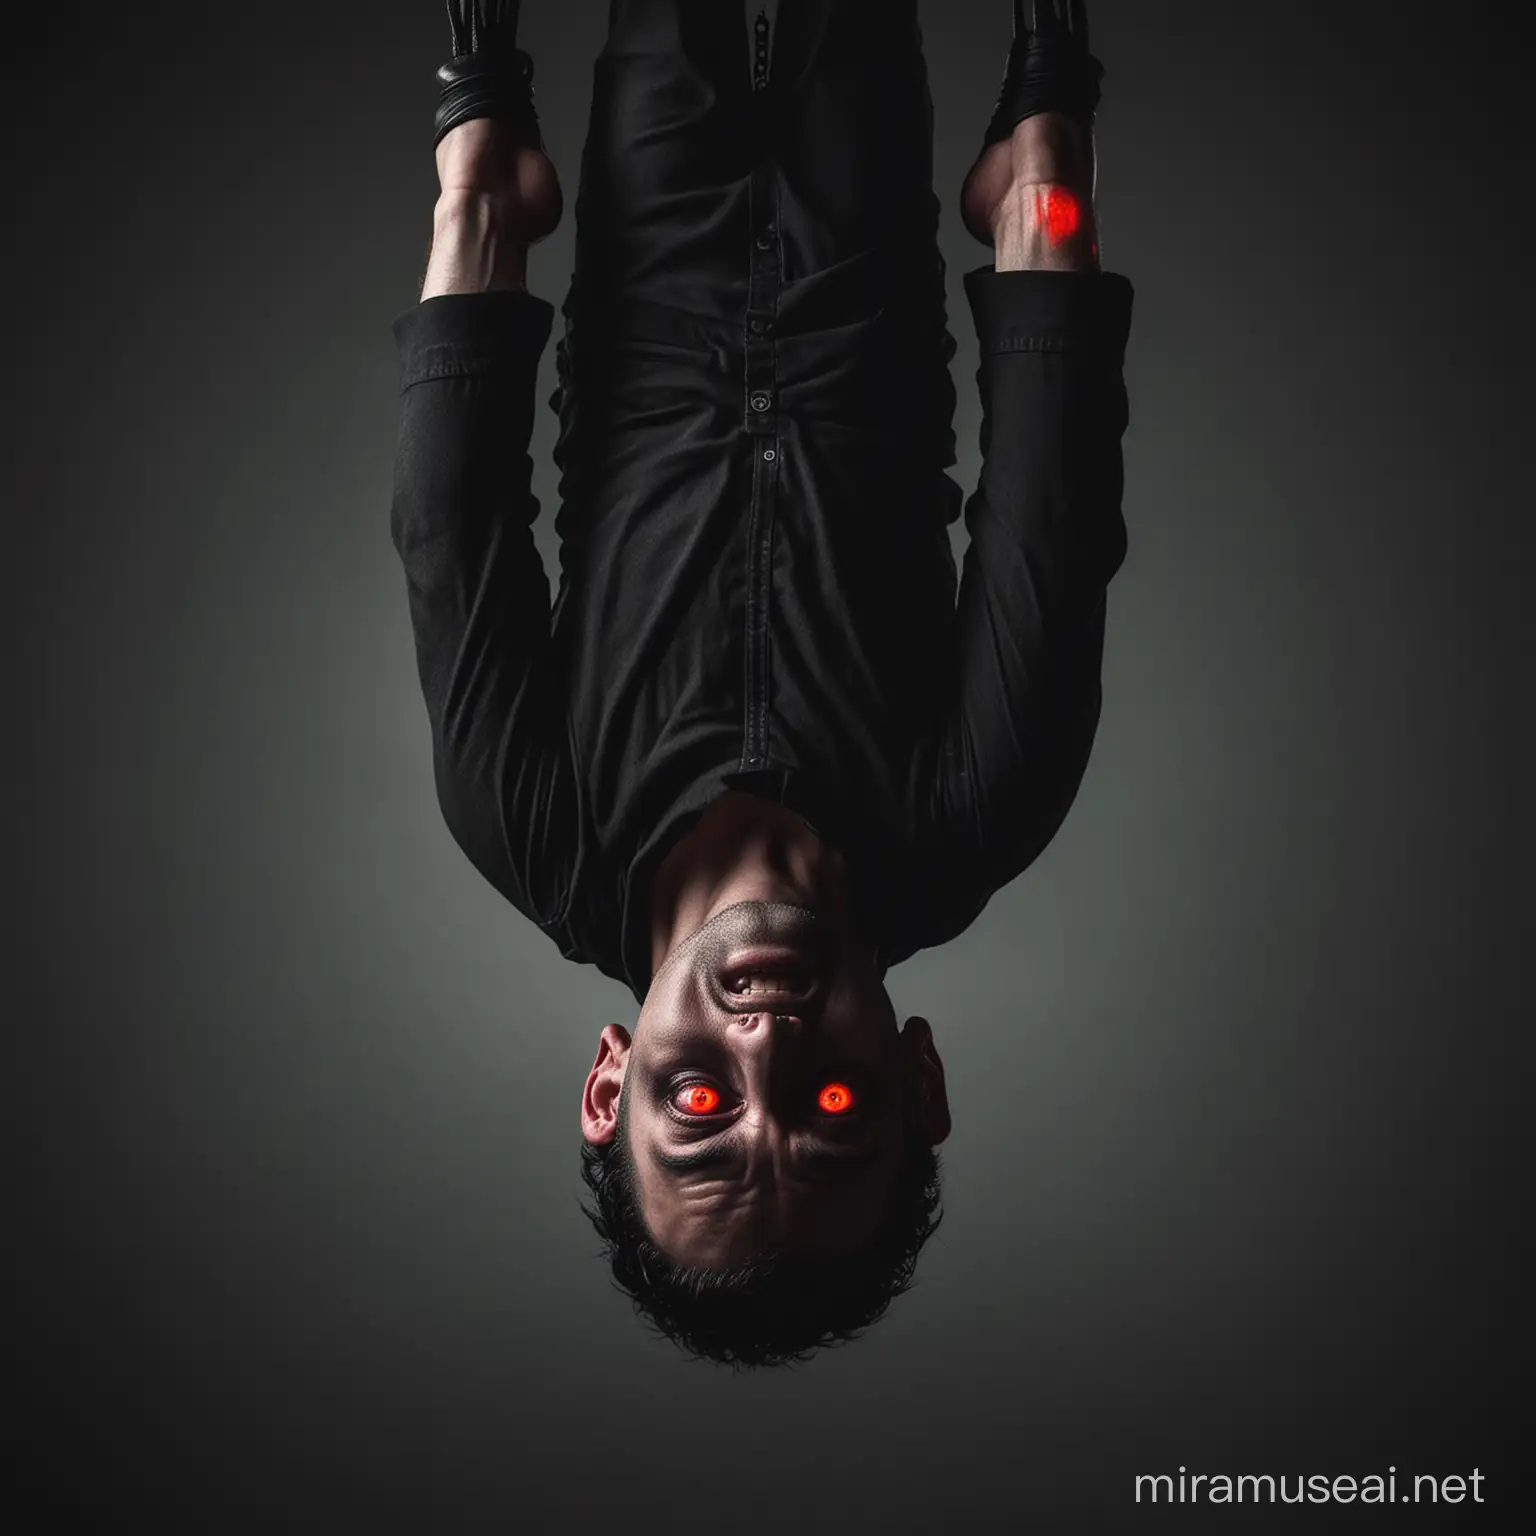 Eerie Male Figure Suspended Upside Down with Glowing Red Eyes